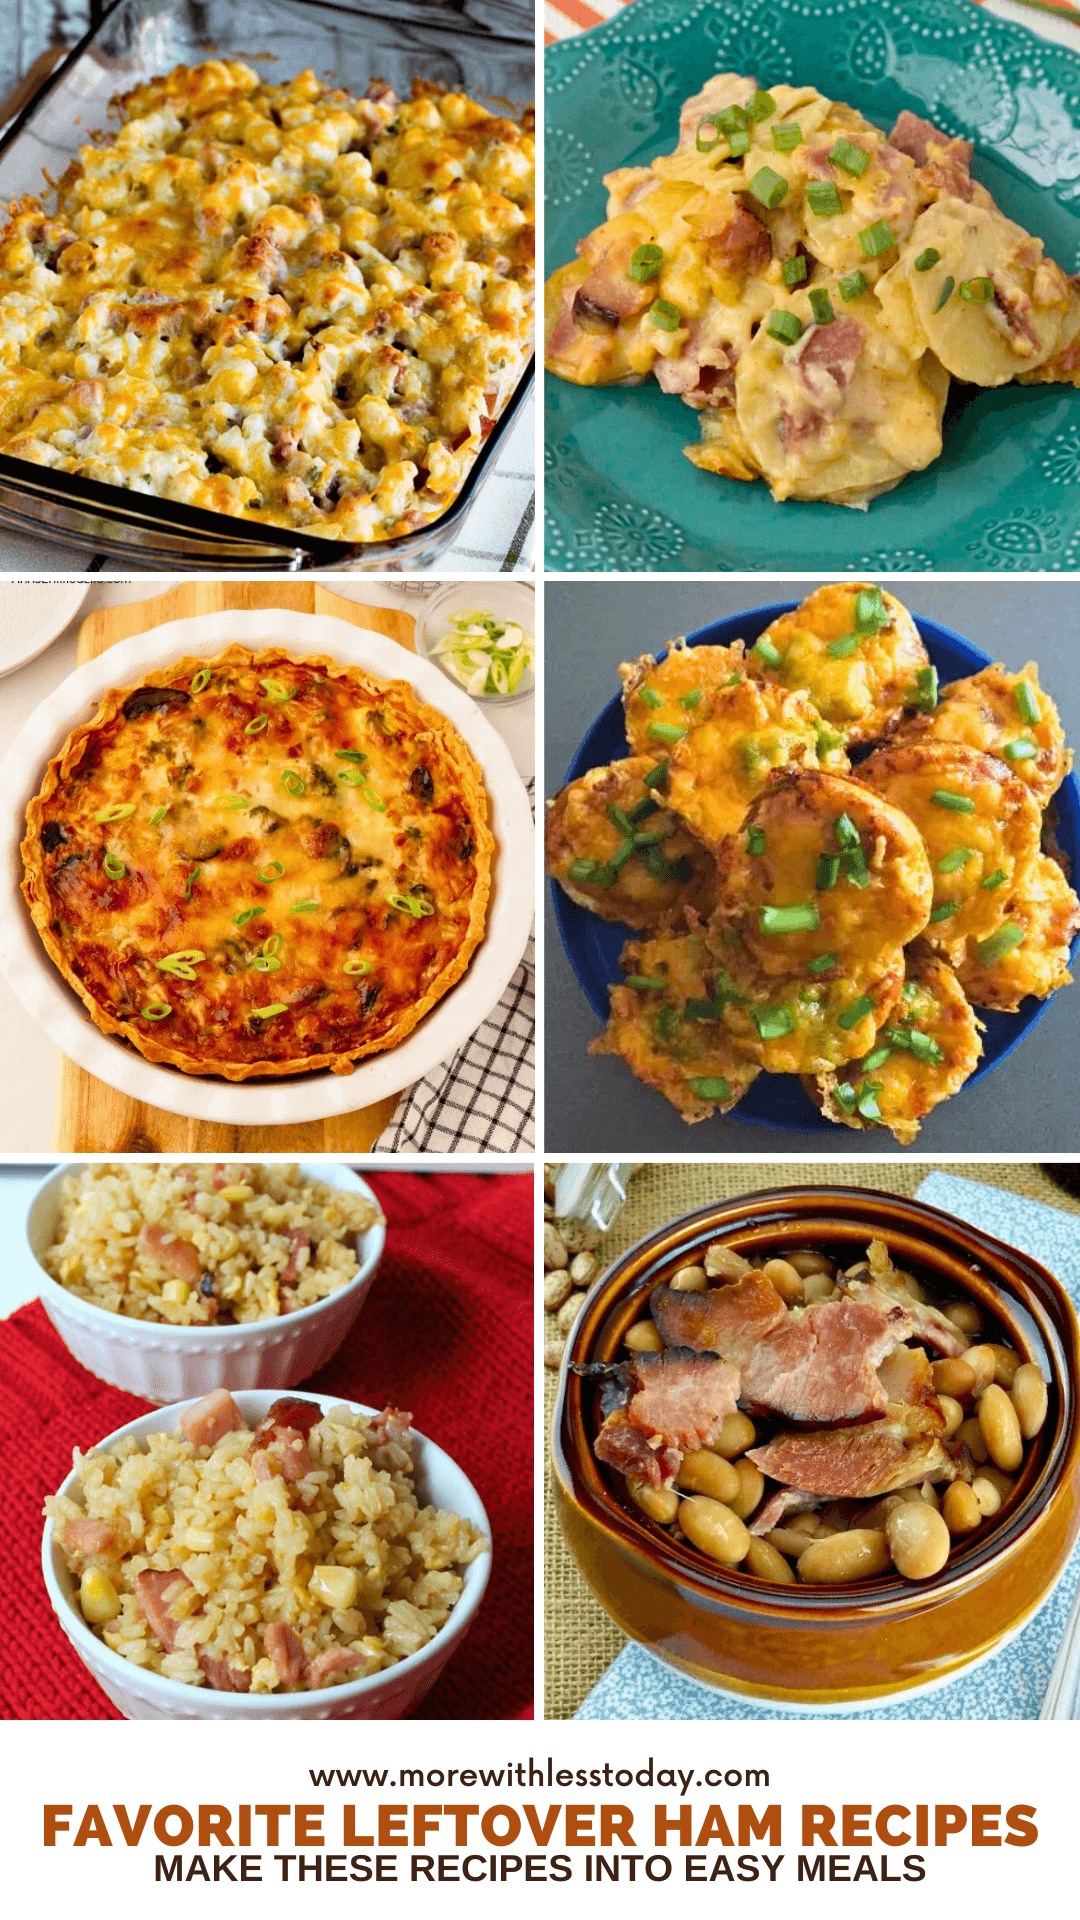 Favorite Leftover Ham Recipes to Make Into Easy Meals - PIN